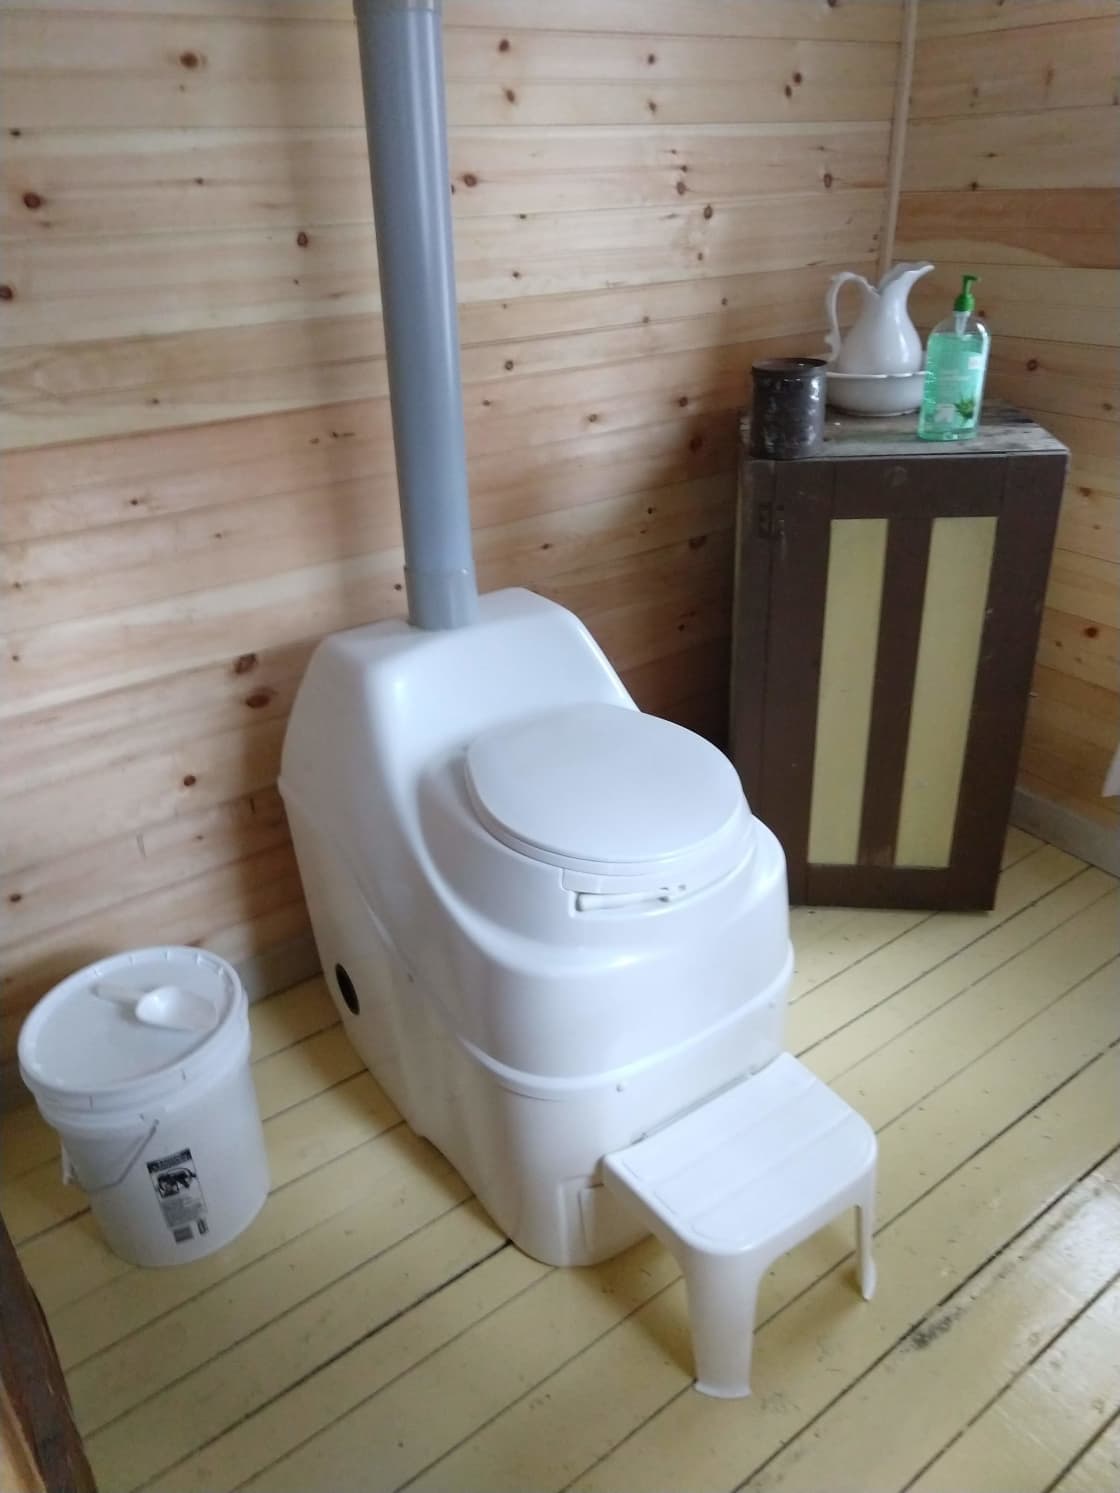 Composting toilet, easy to use and doesn't smell